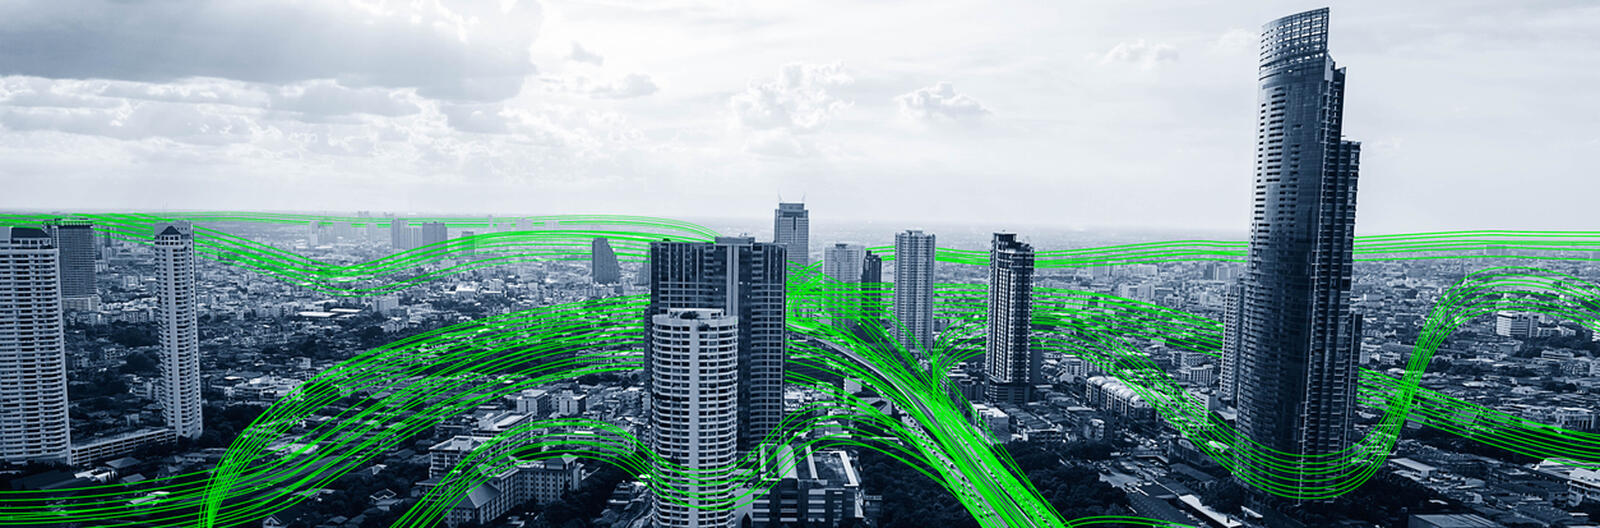 resilient smart city connection with data communication flow network